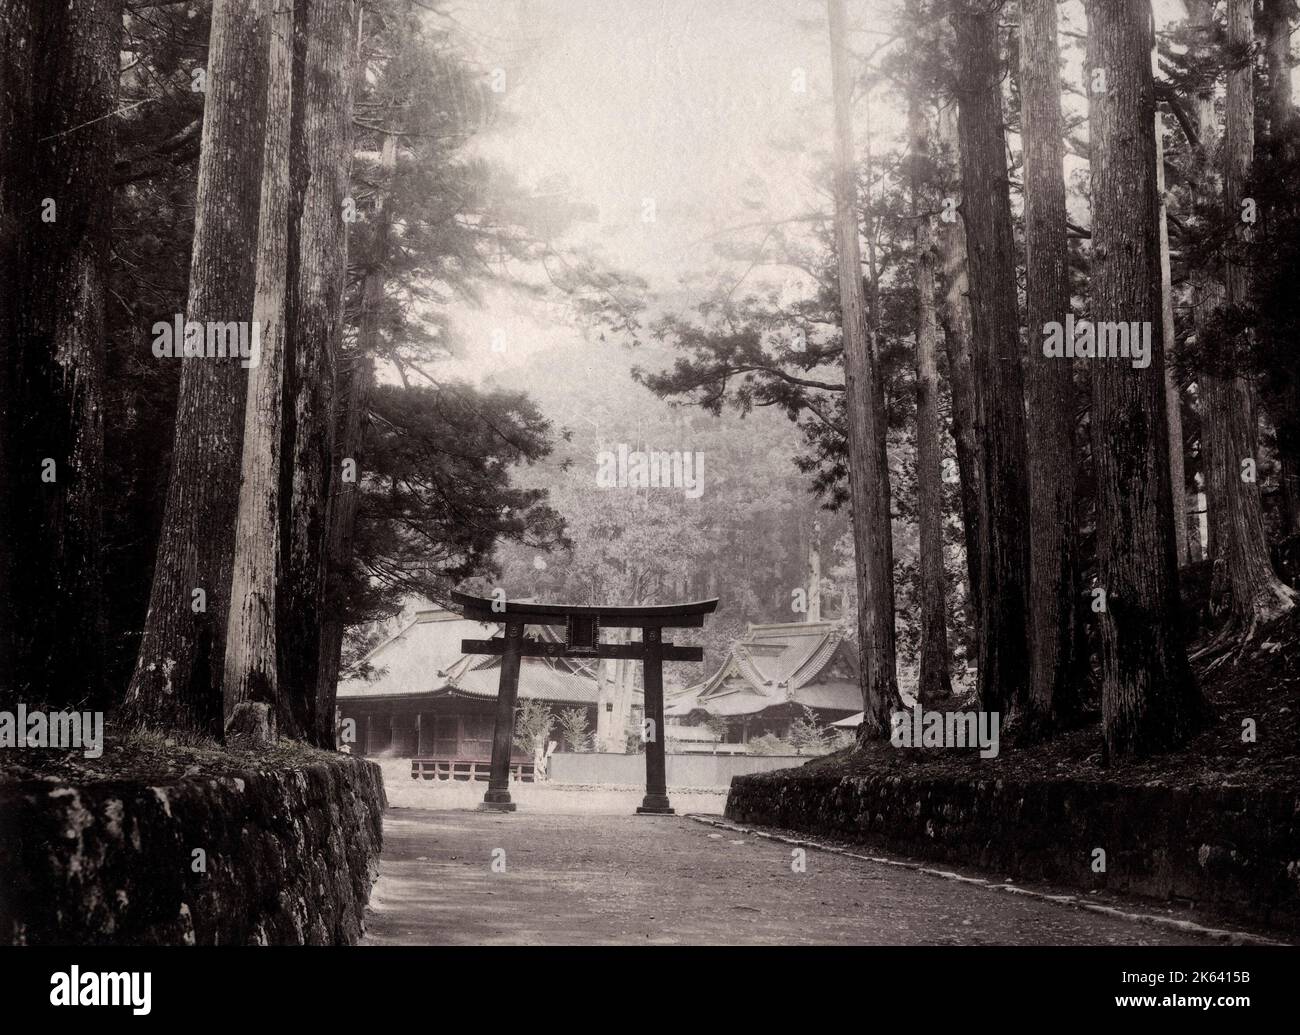 Vintage 19th century photograph: Temple and torii at Nikko, Japan Stock Photo